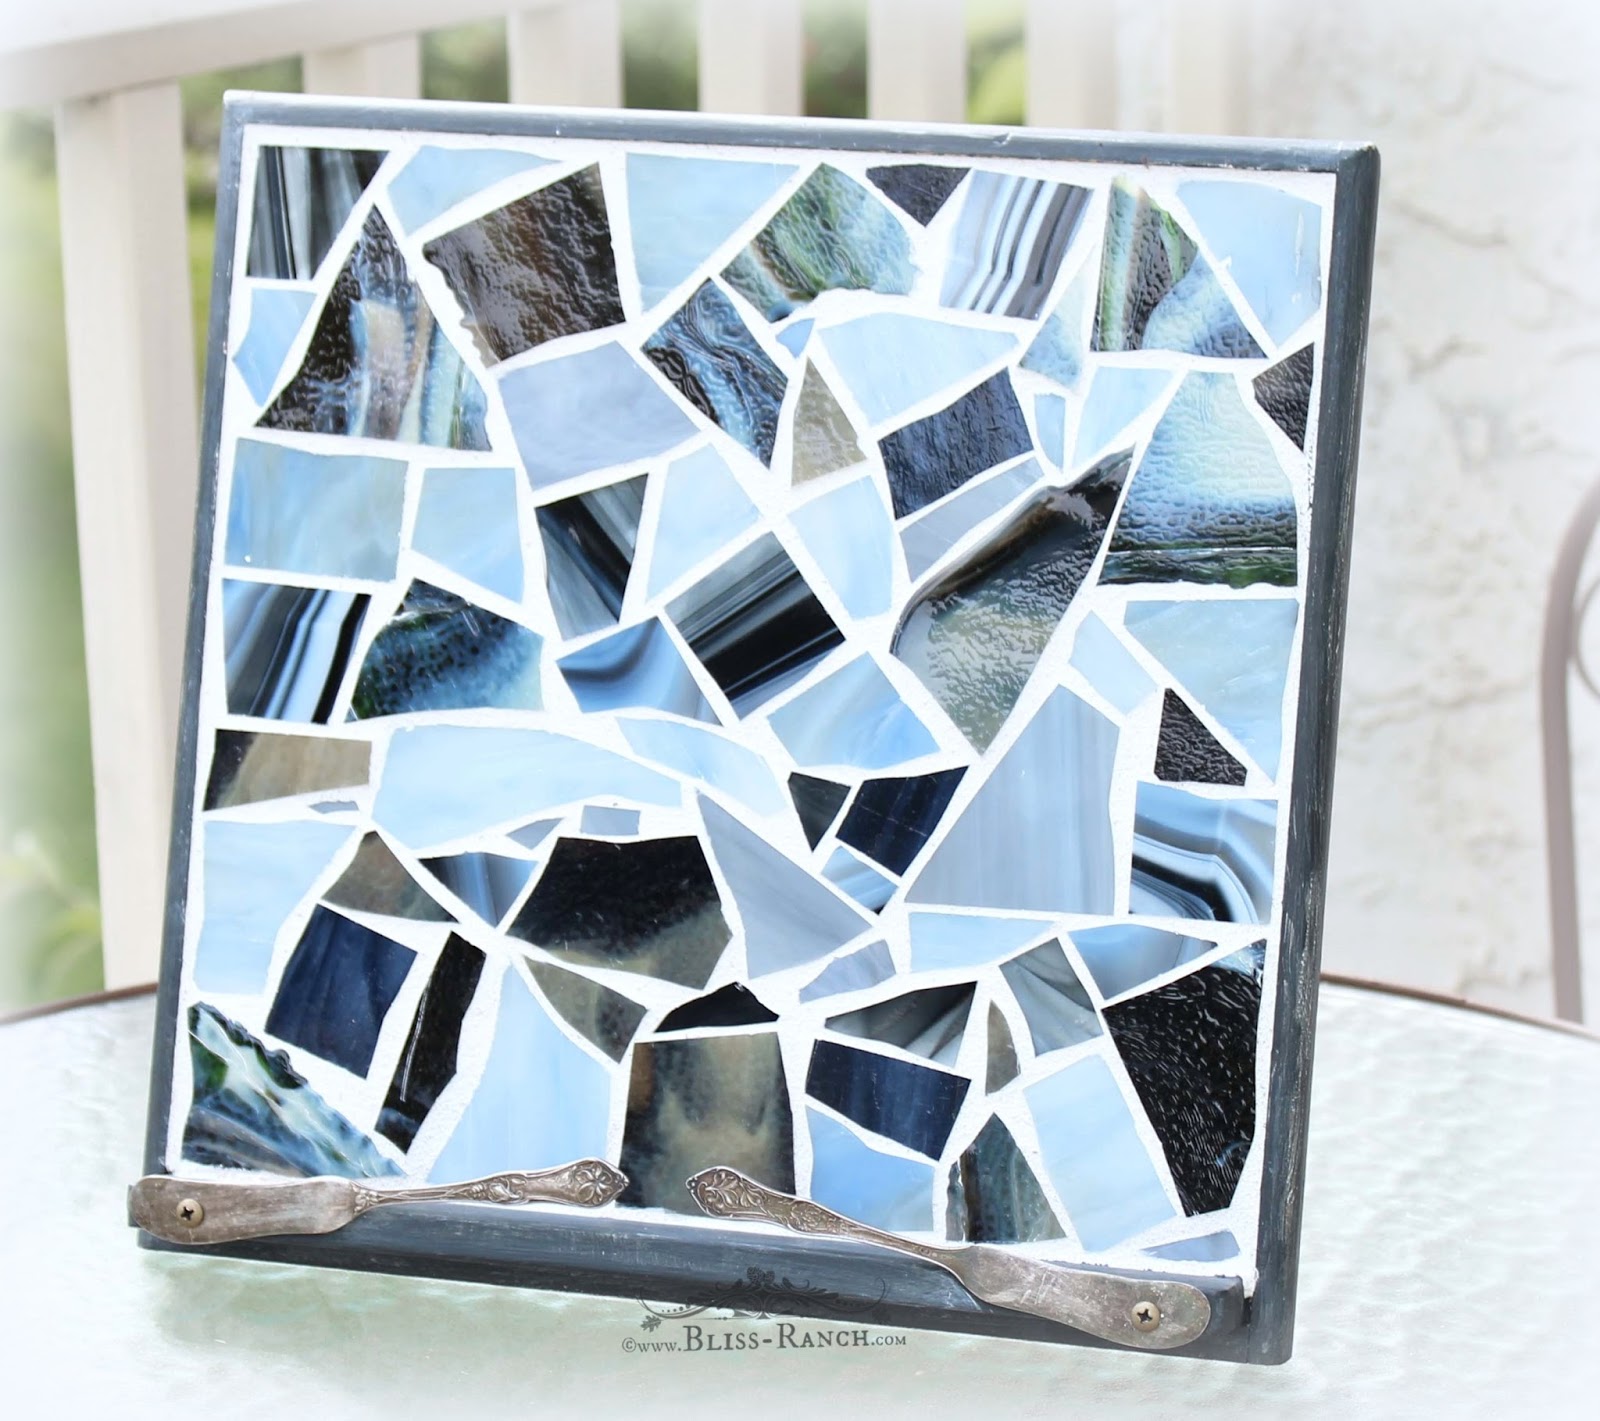 Blue Stained Glass Mosaic Ipad Stand With Vintage Silverware, Bliss-Ranch.com